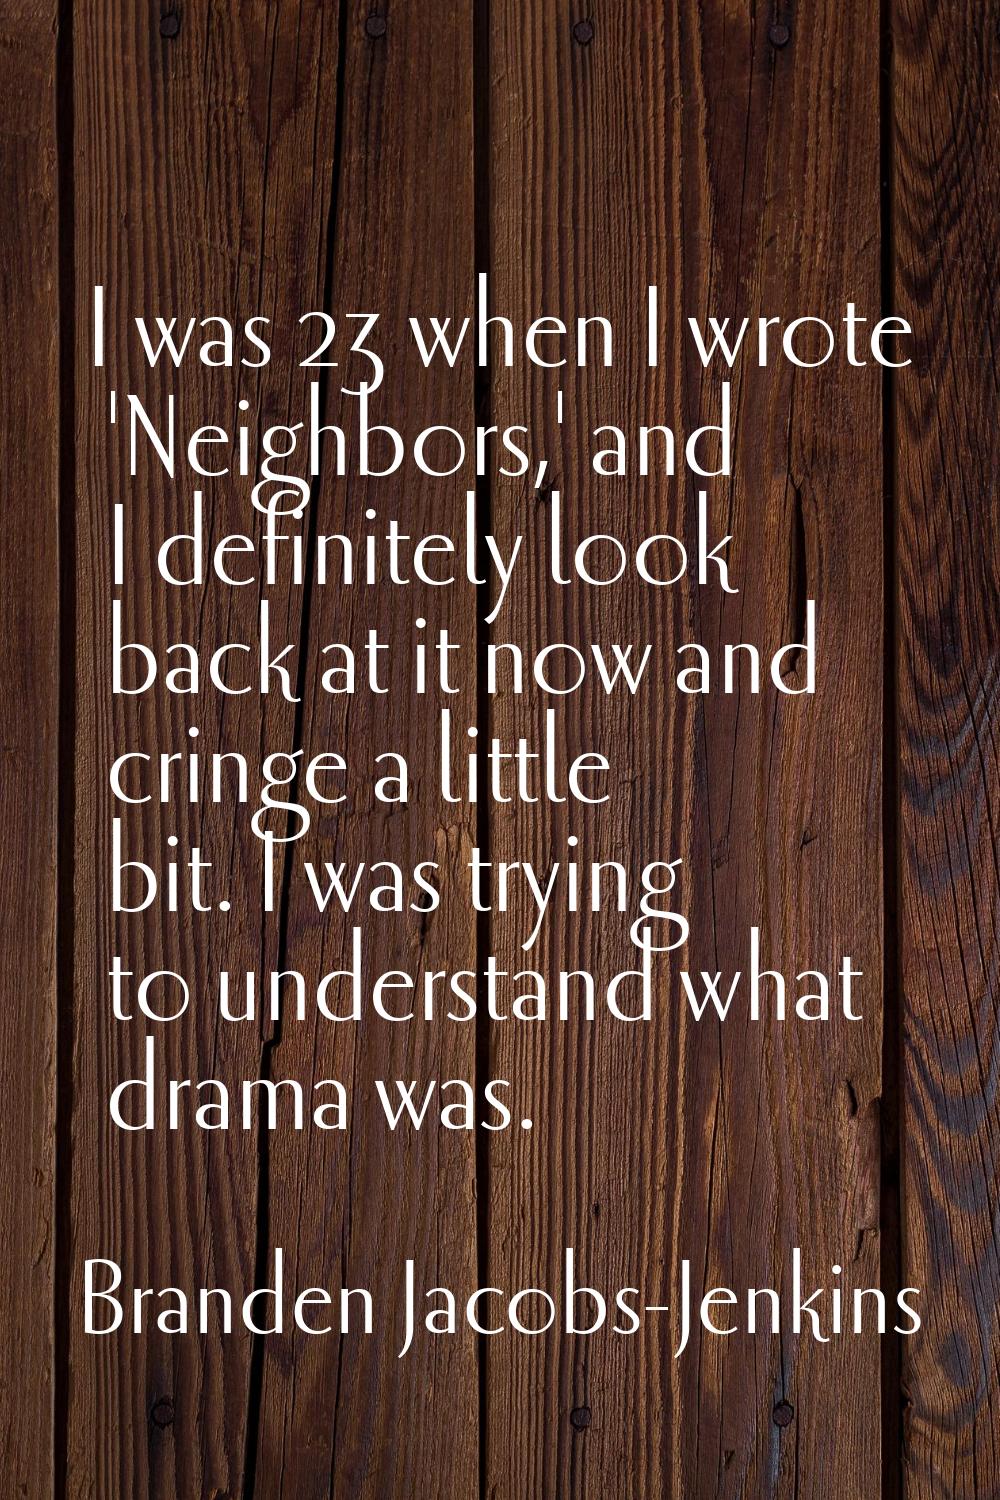 I was 23 when I wrote 'Neighbors,' and I definitely look back at it now and cringe a little bit. I 